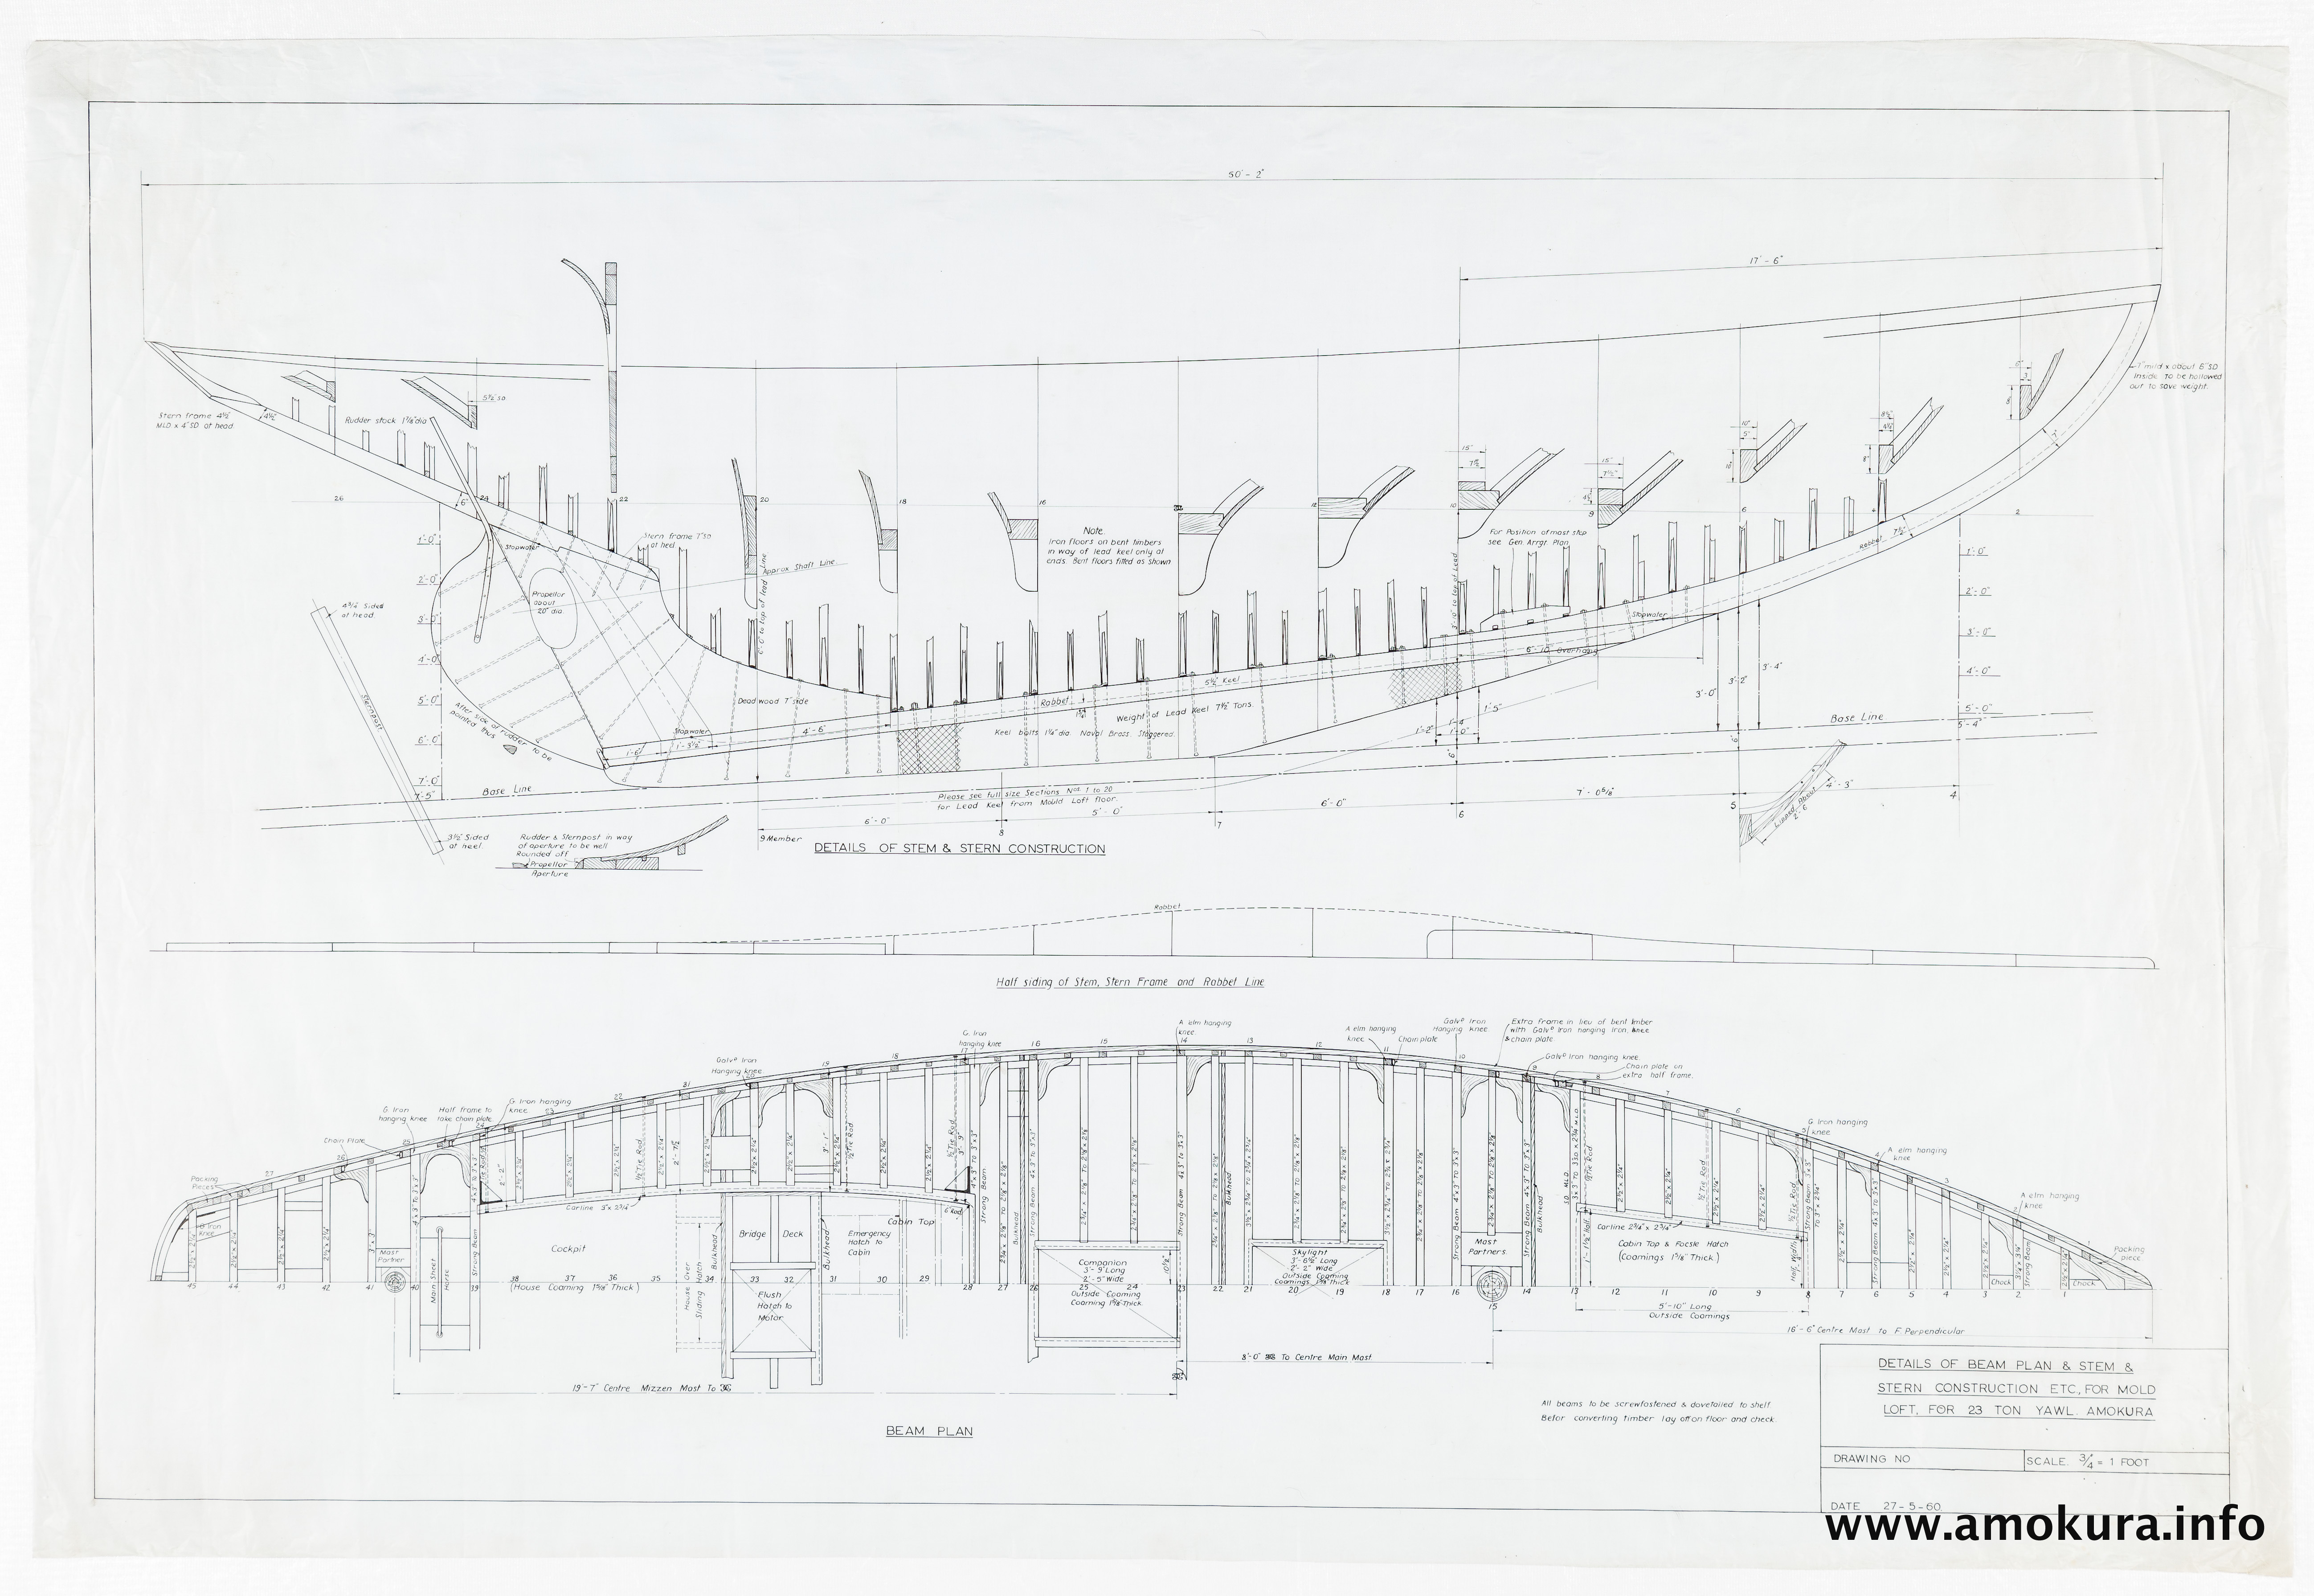 Stem and keel construction drawing and beam plan (1960)